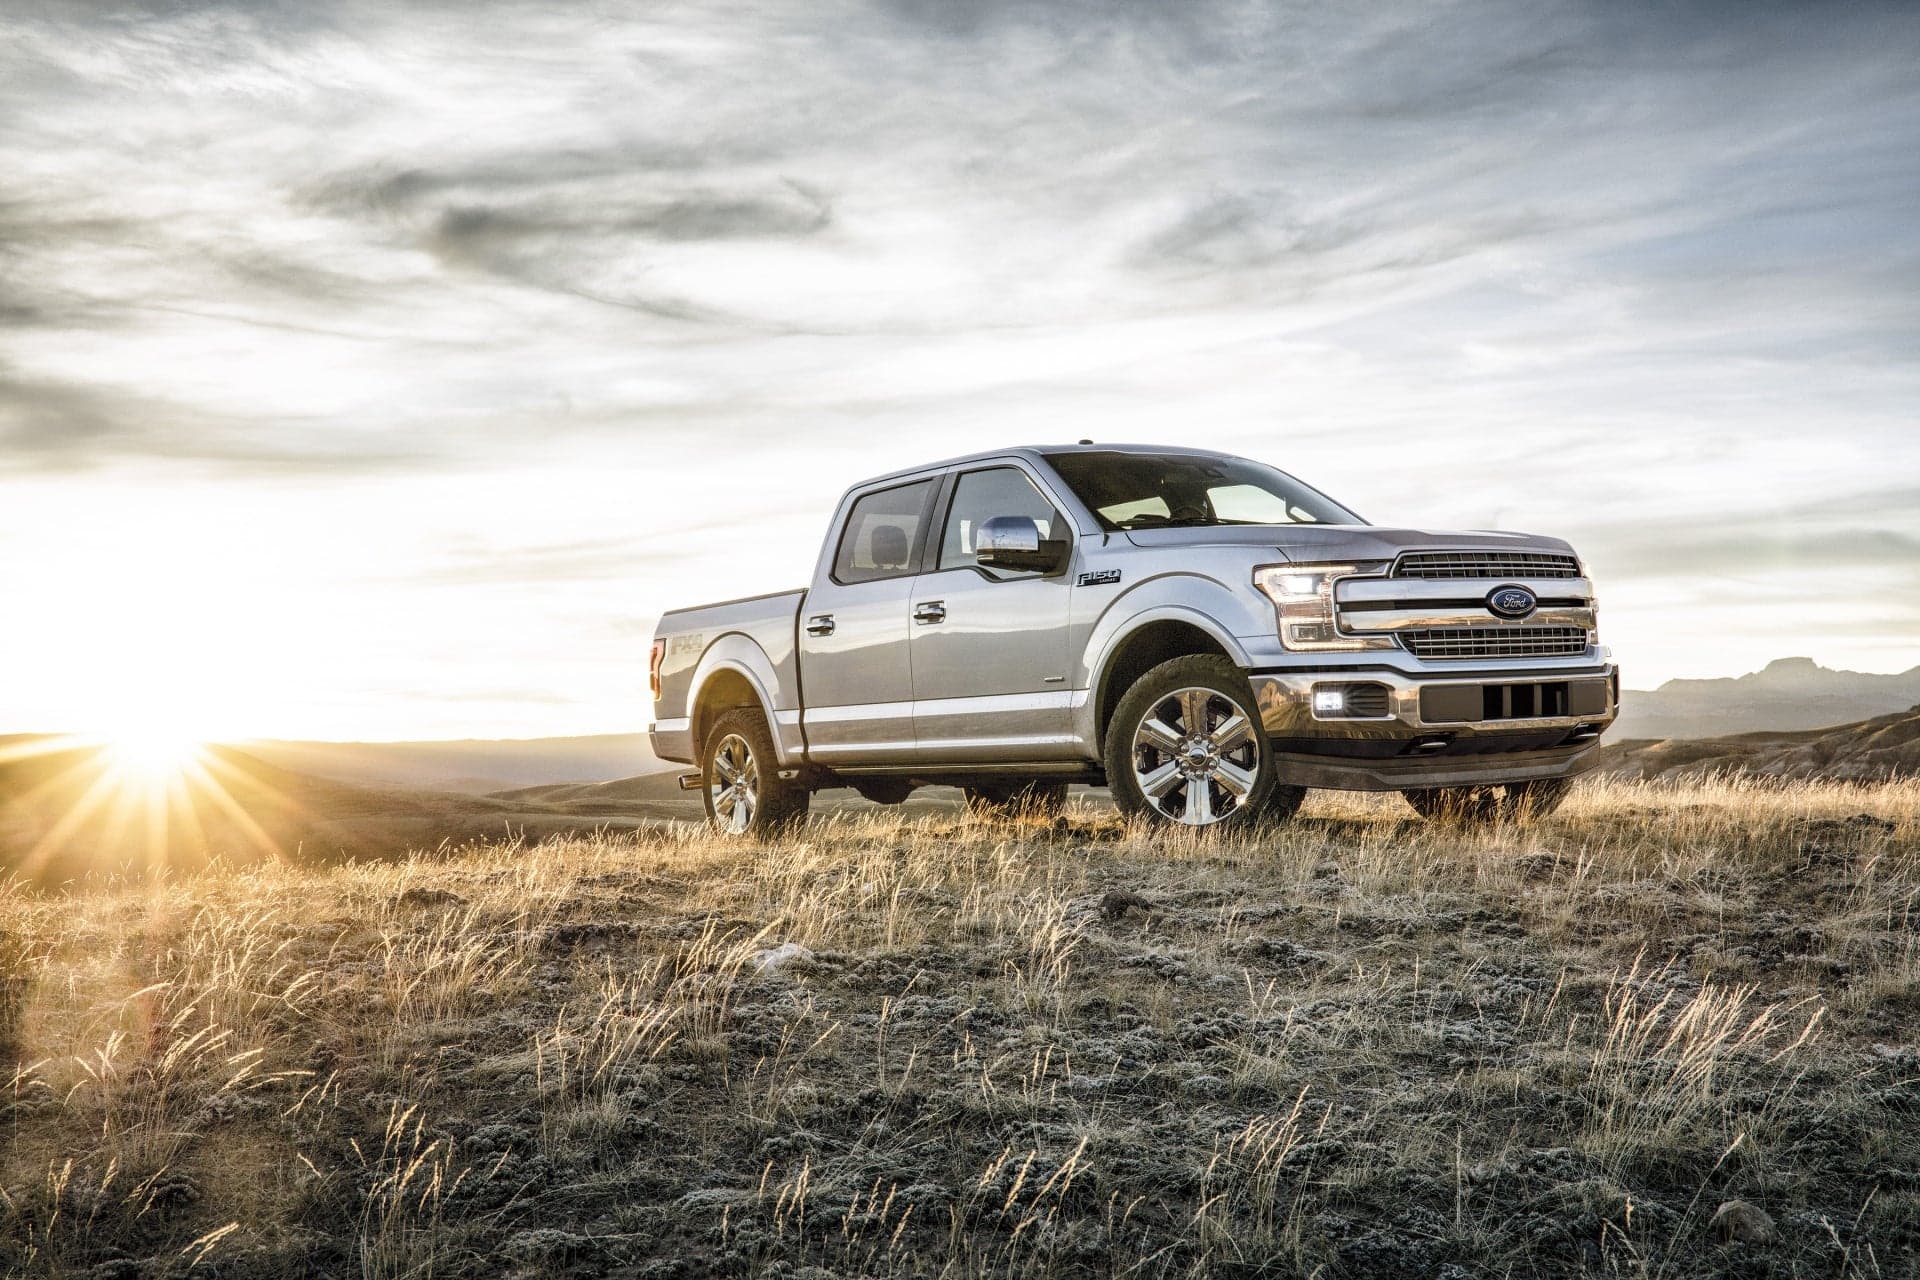 History Channel to Highlight Ford F-Series Heritage With ‘Truck Weekend in America’ Premiere